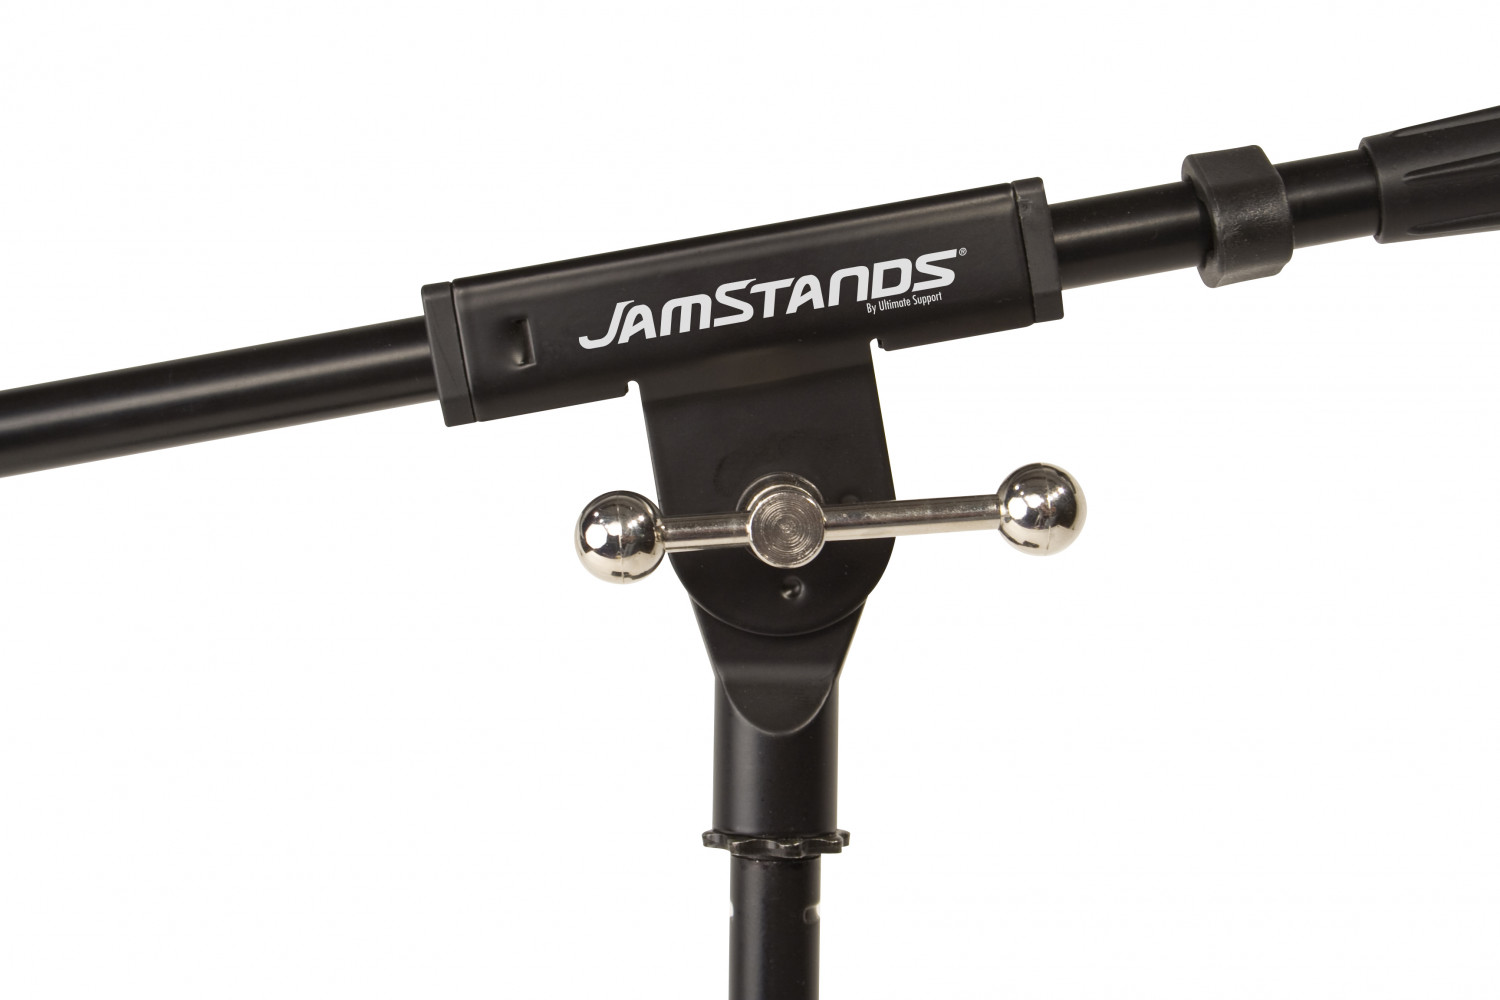 Ultimate Support JS-KD50 Kick Drum/Guitar Amp Mic Stand